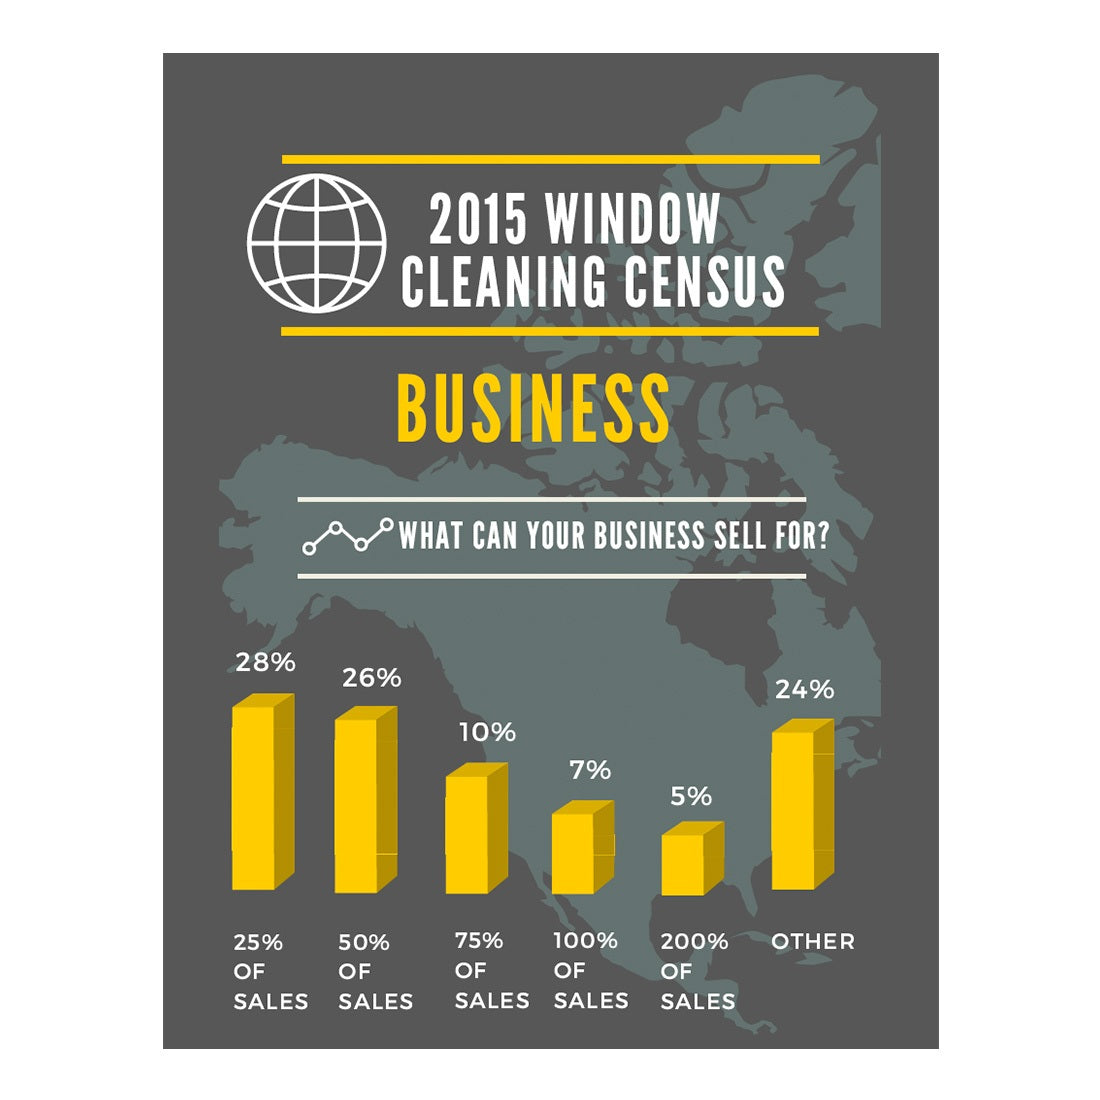 2015 Window Cleaning Census Business